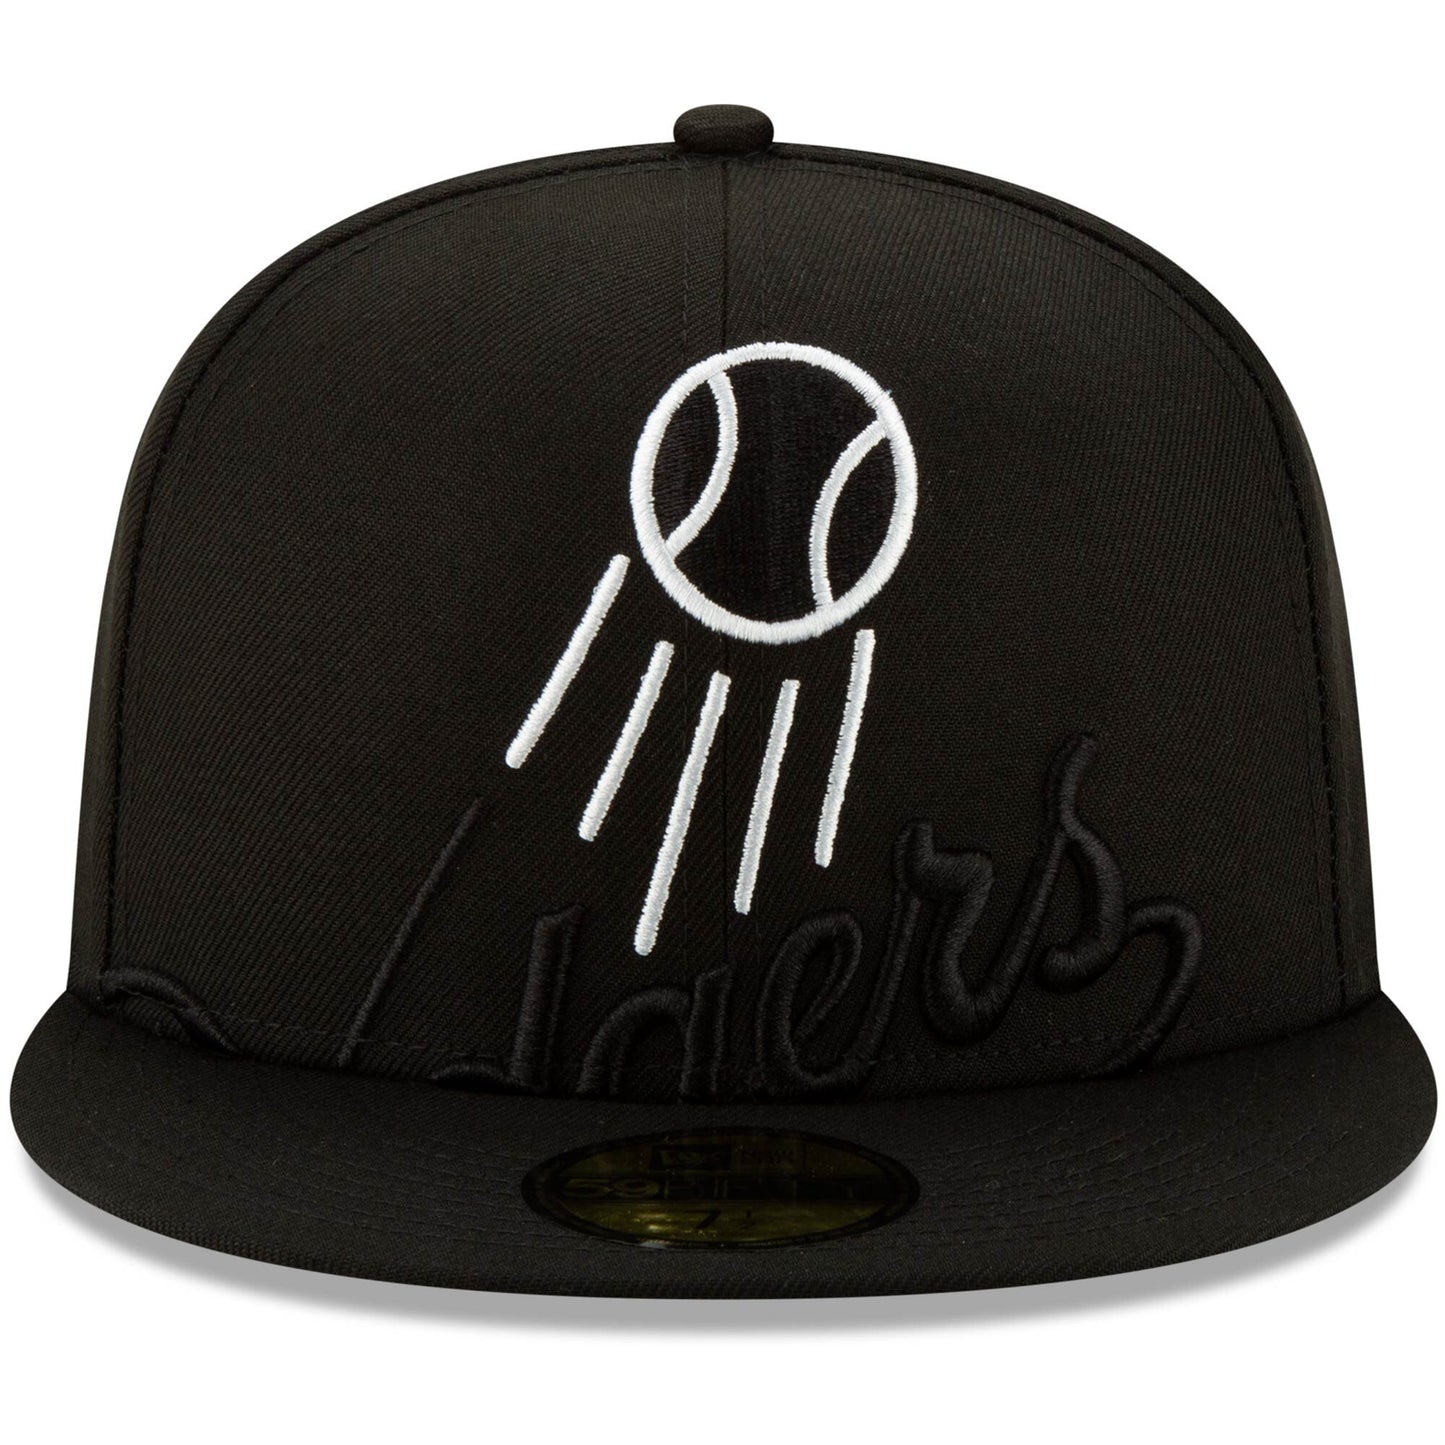 LOS ANGELES DODGERS LOGO ELEMENTS 5950 FITTED BLACK/WHITE